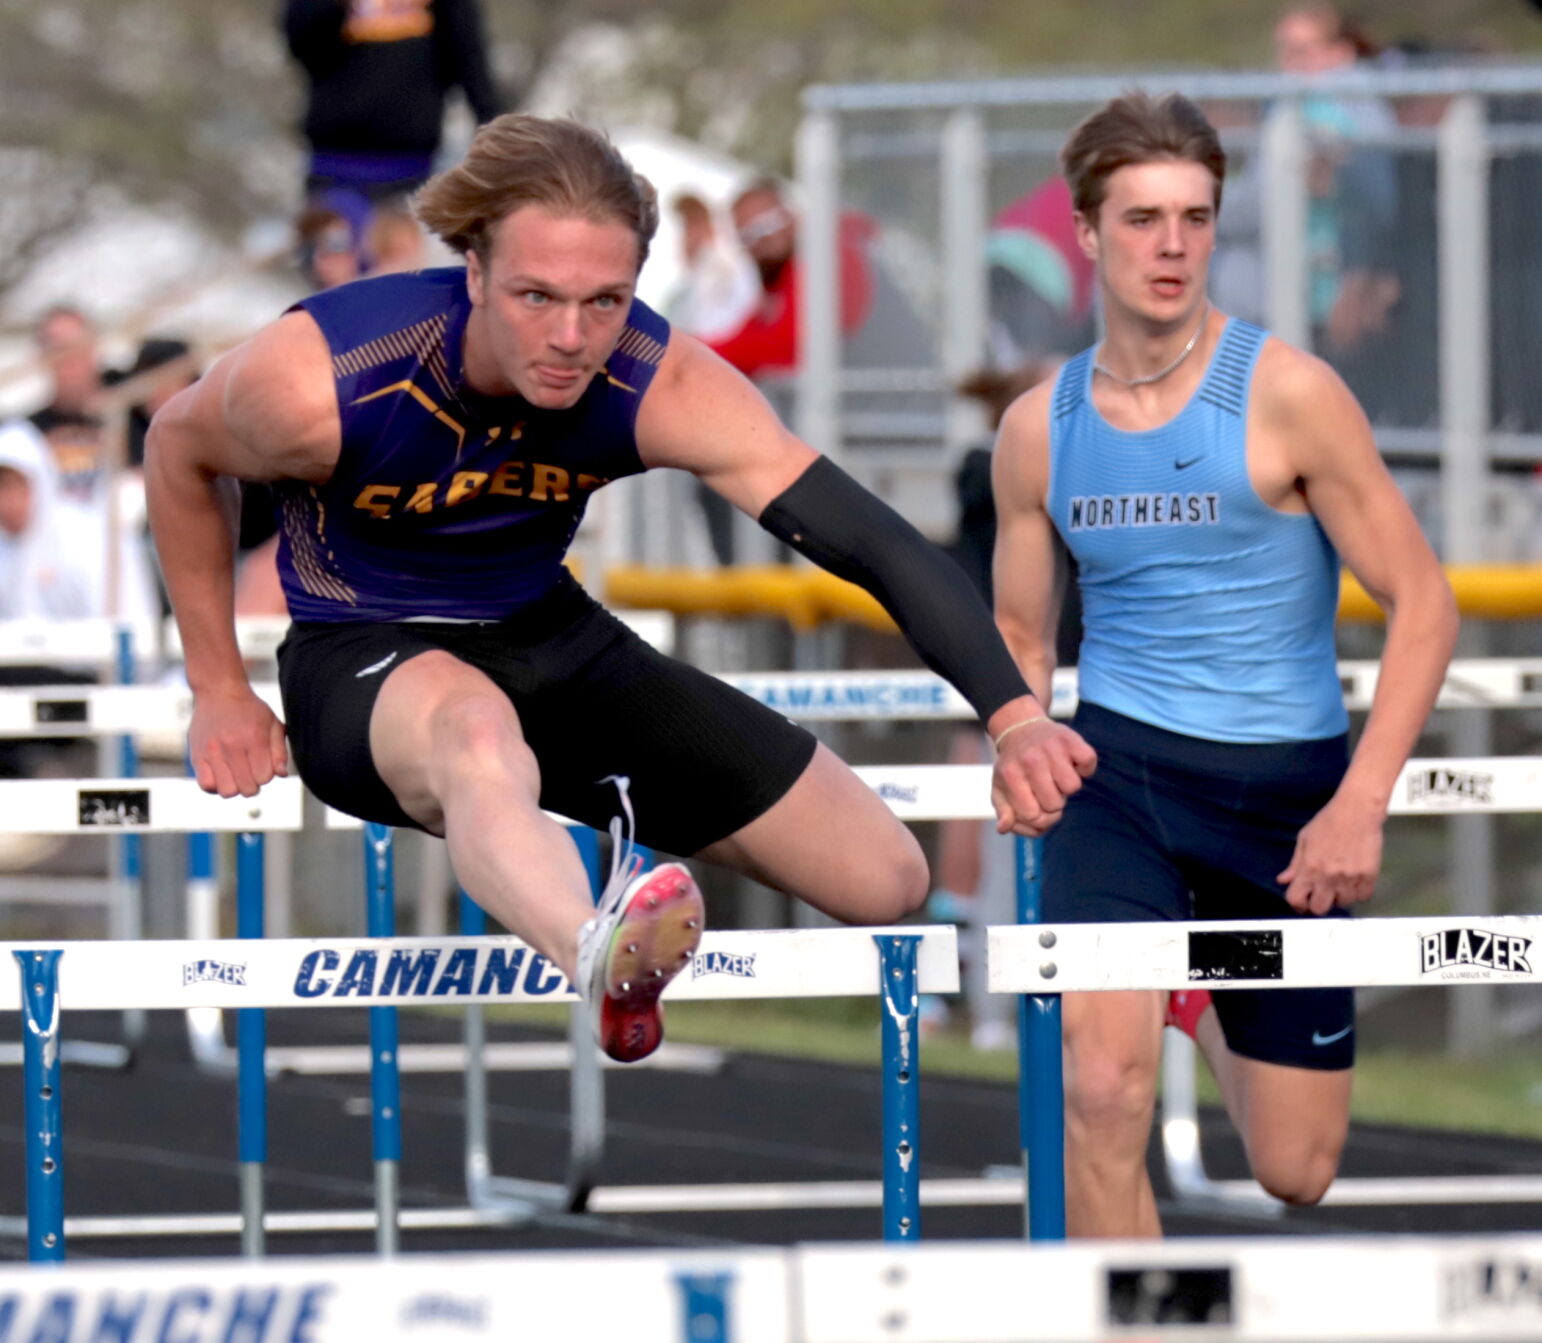 Central DeWitt Boys Dominate Camanche Storm Relays; Northeast and Camanche Boys Top Three